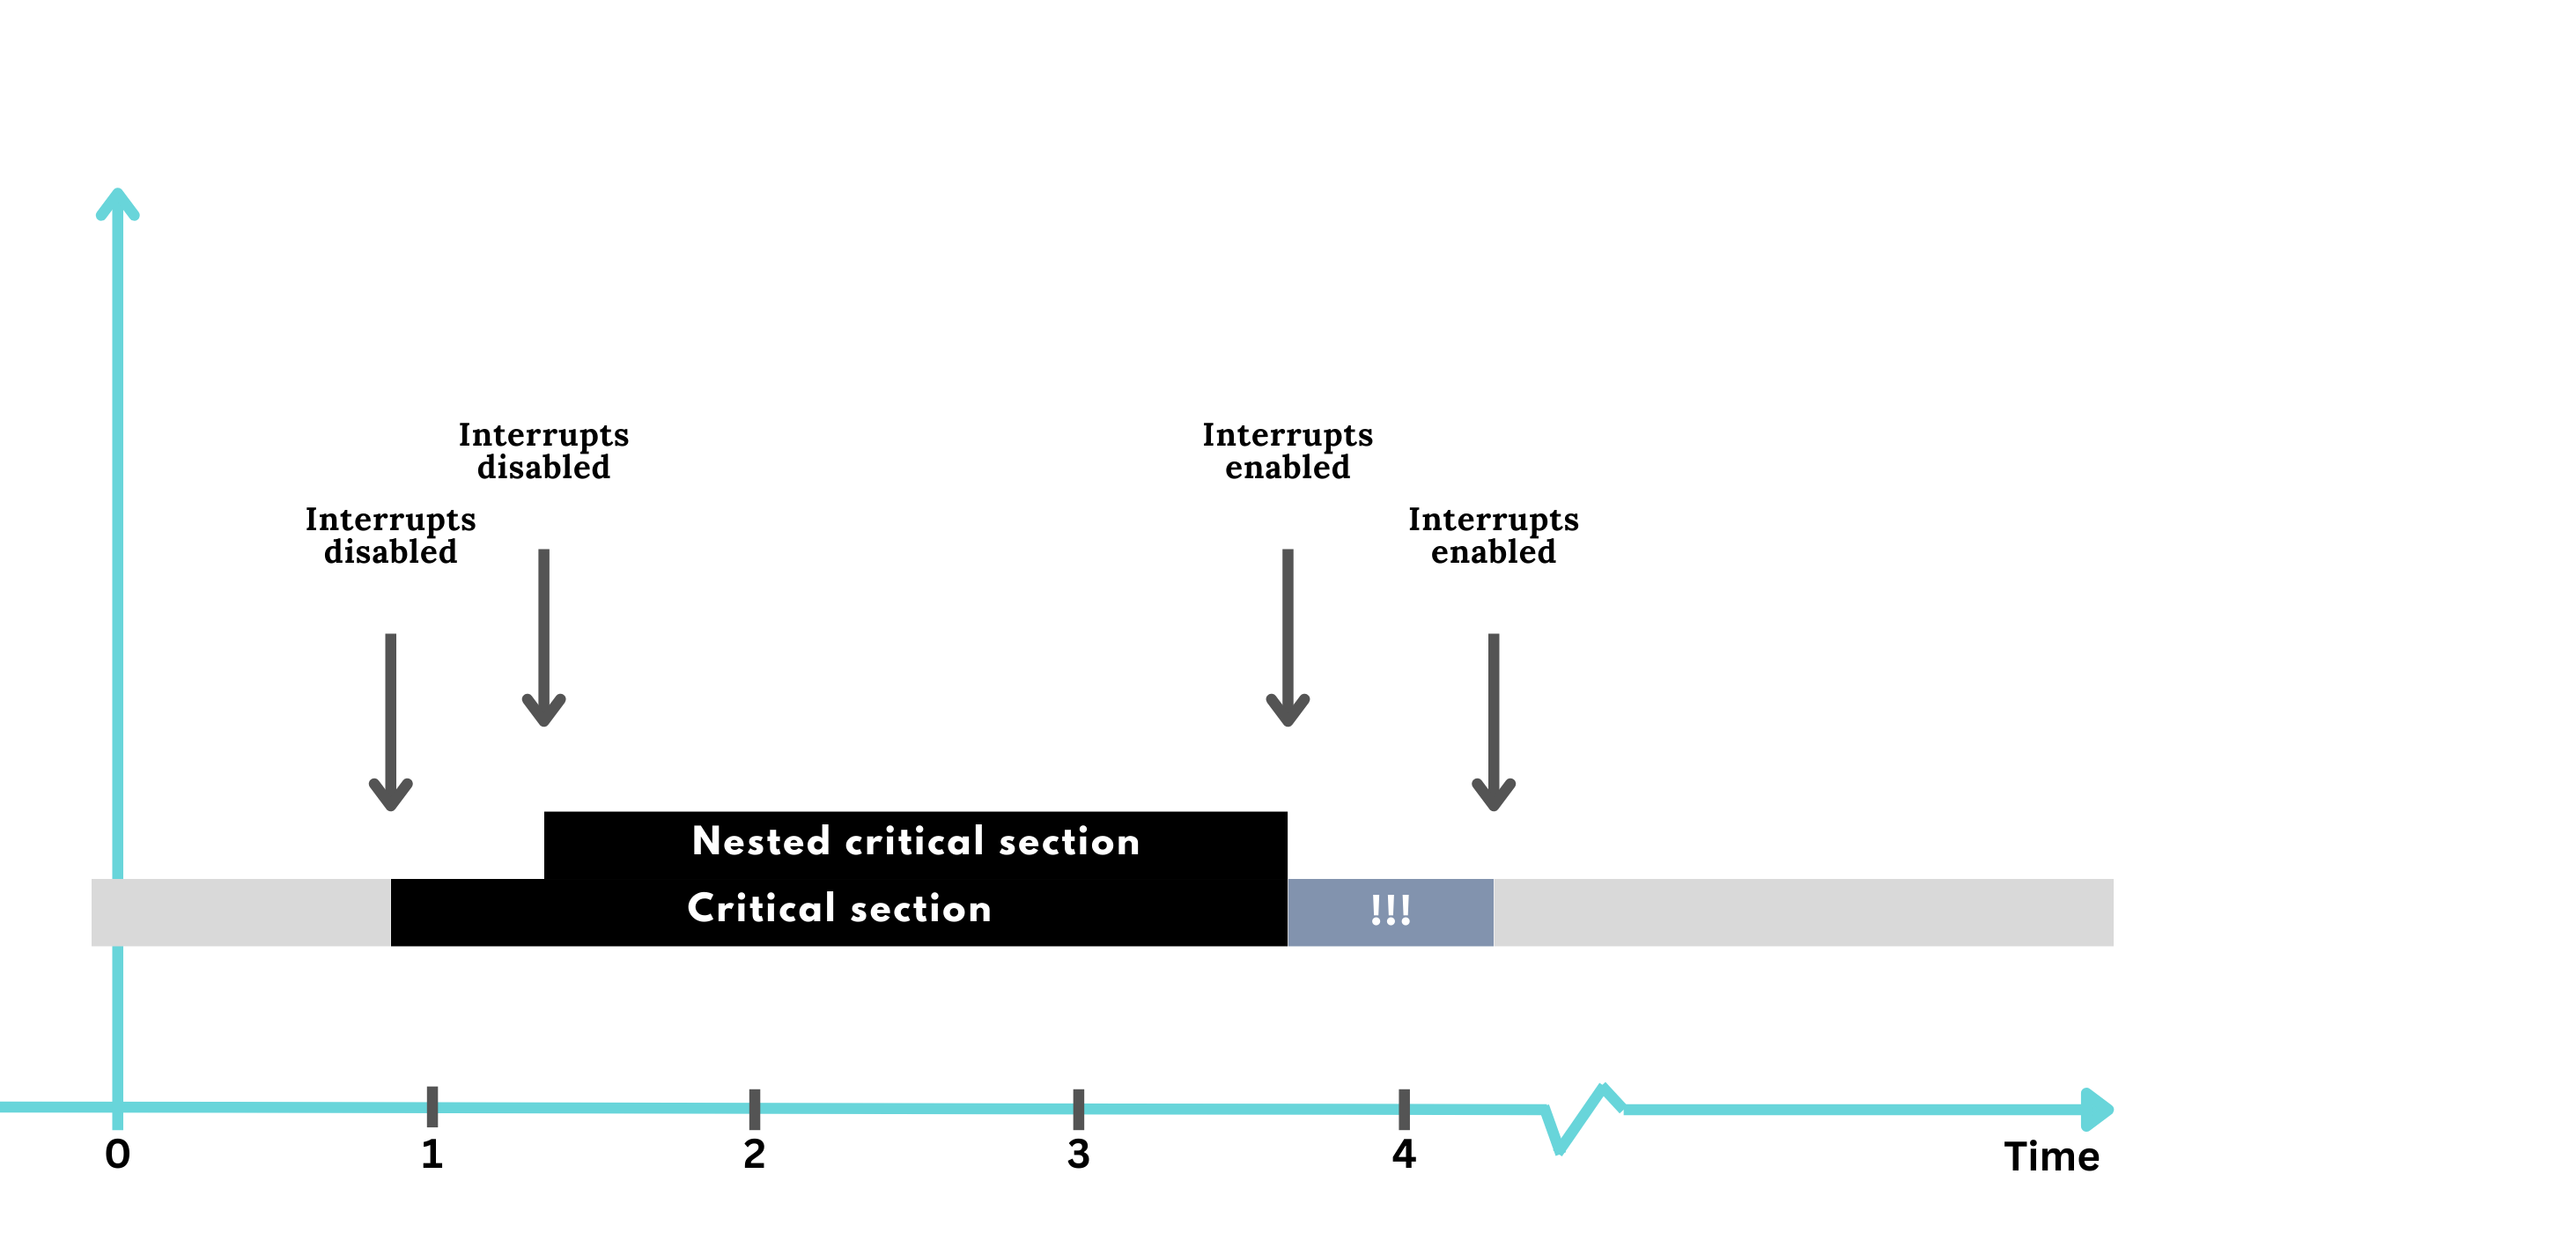 Critical Section